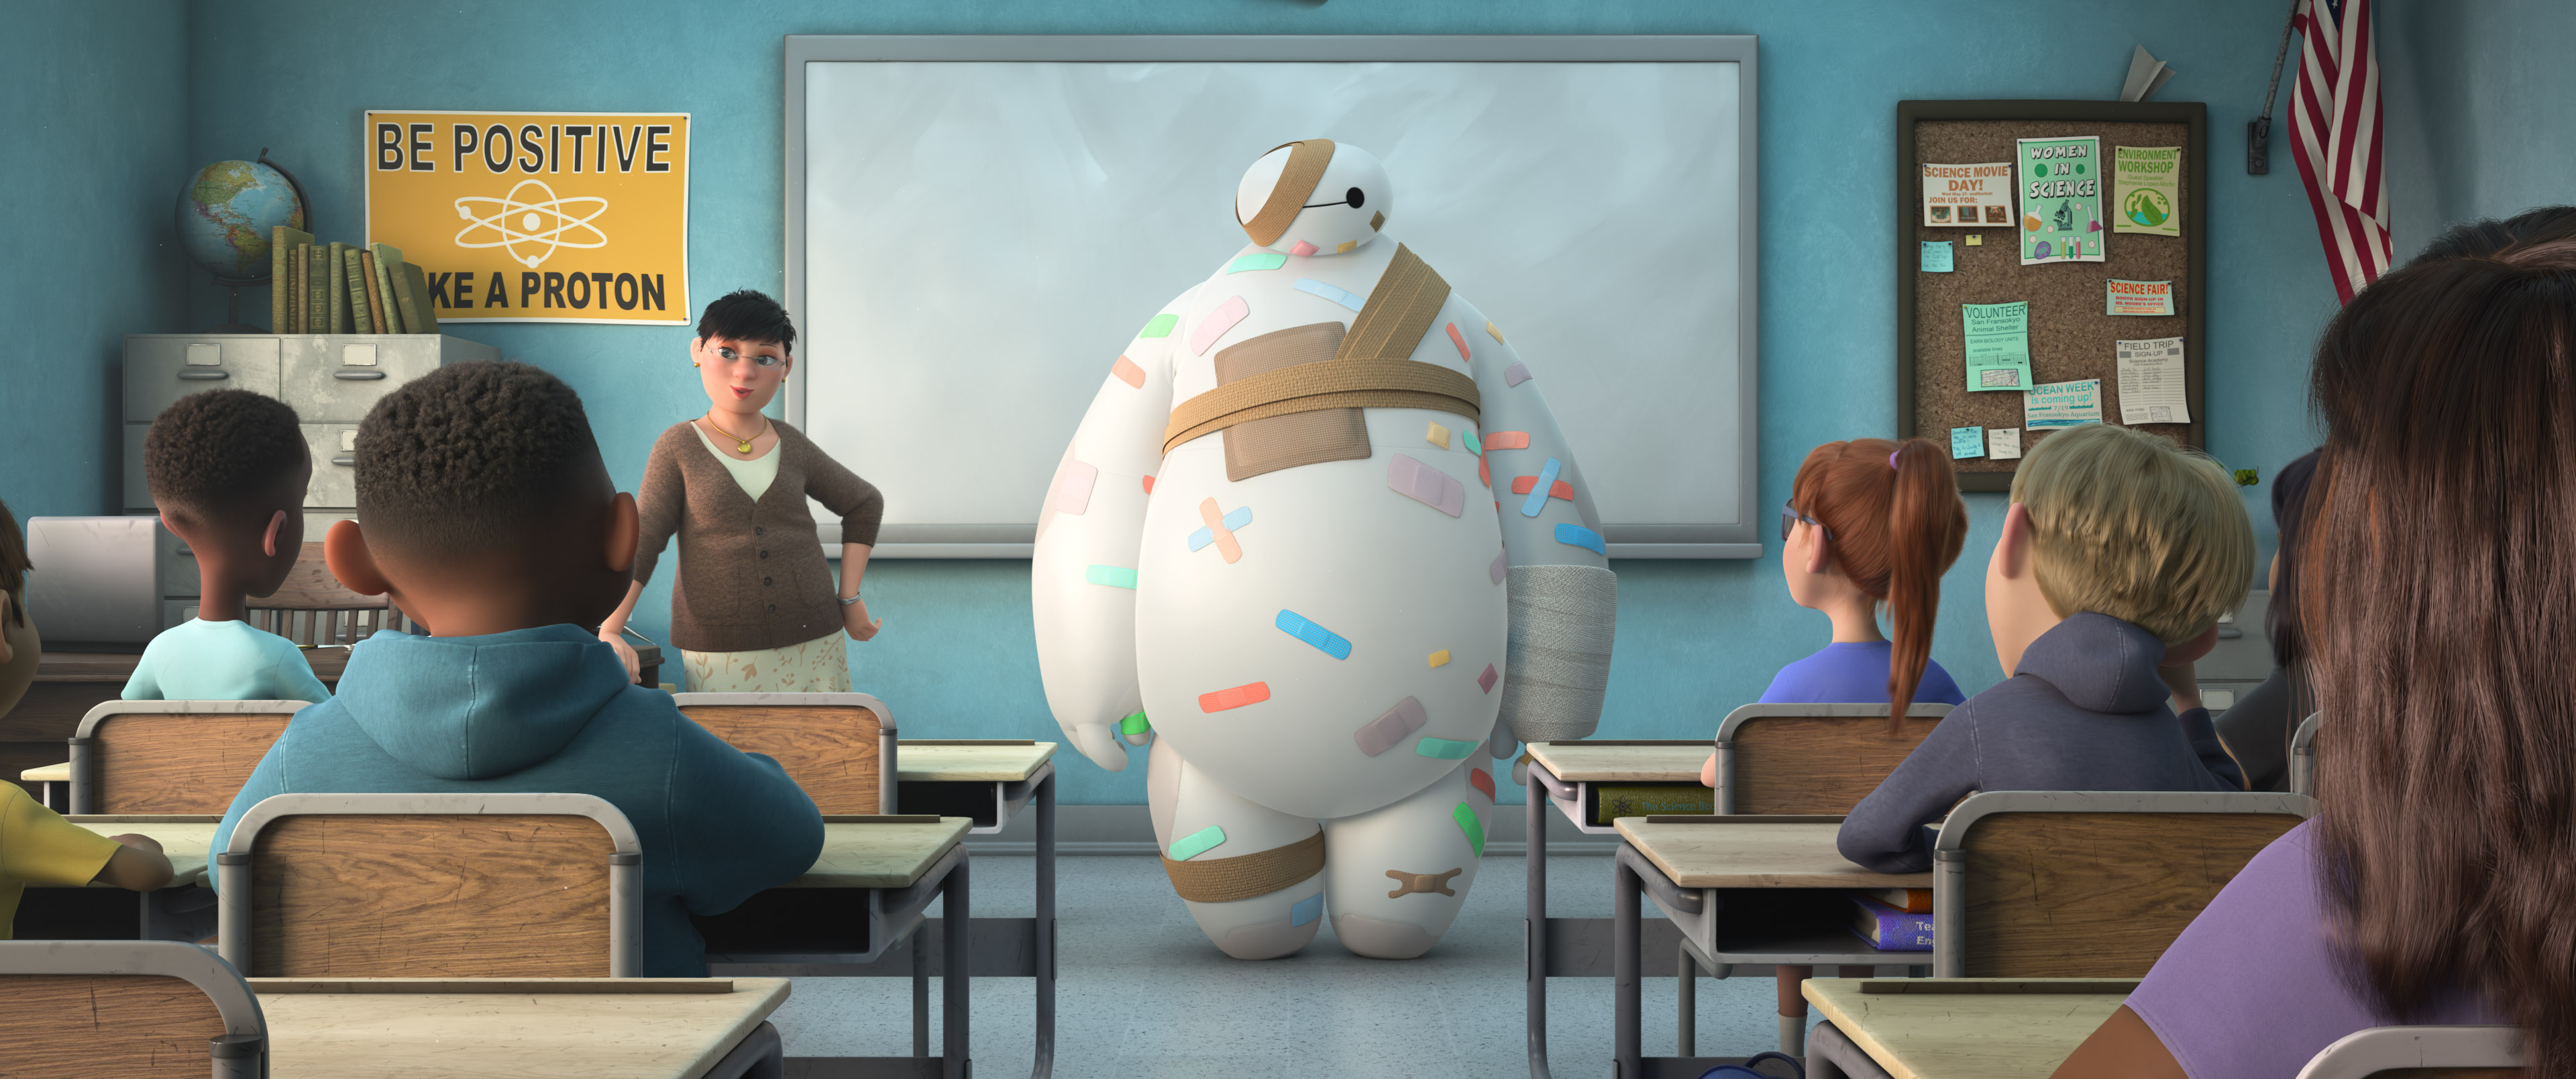 TV Show Baymax! HD Wallpaper | Background Image